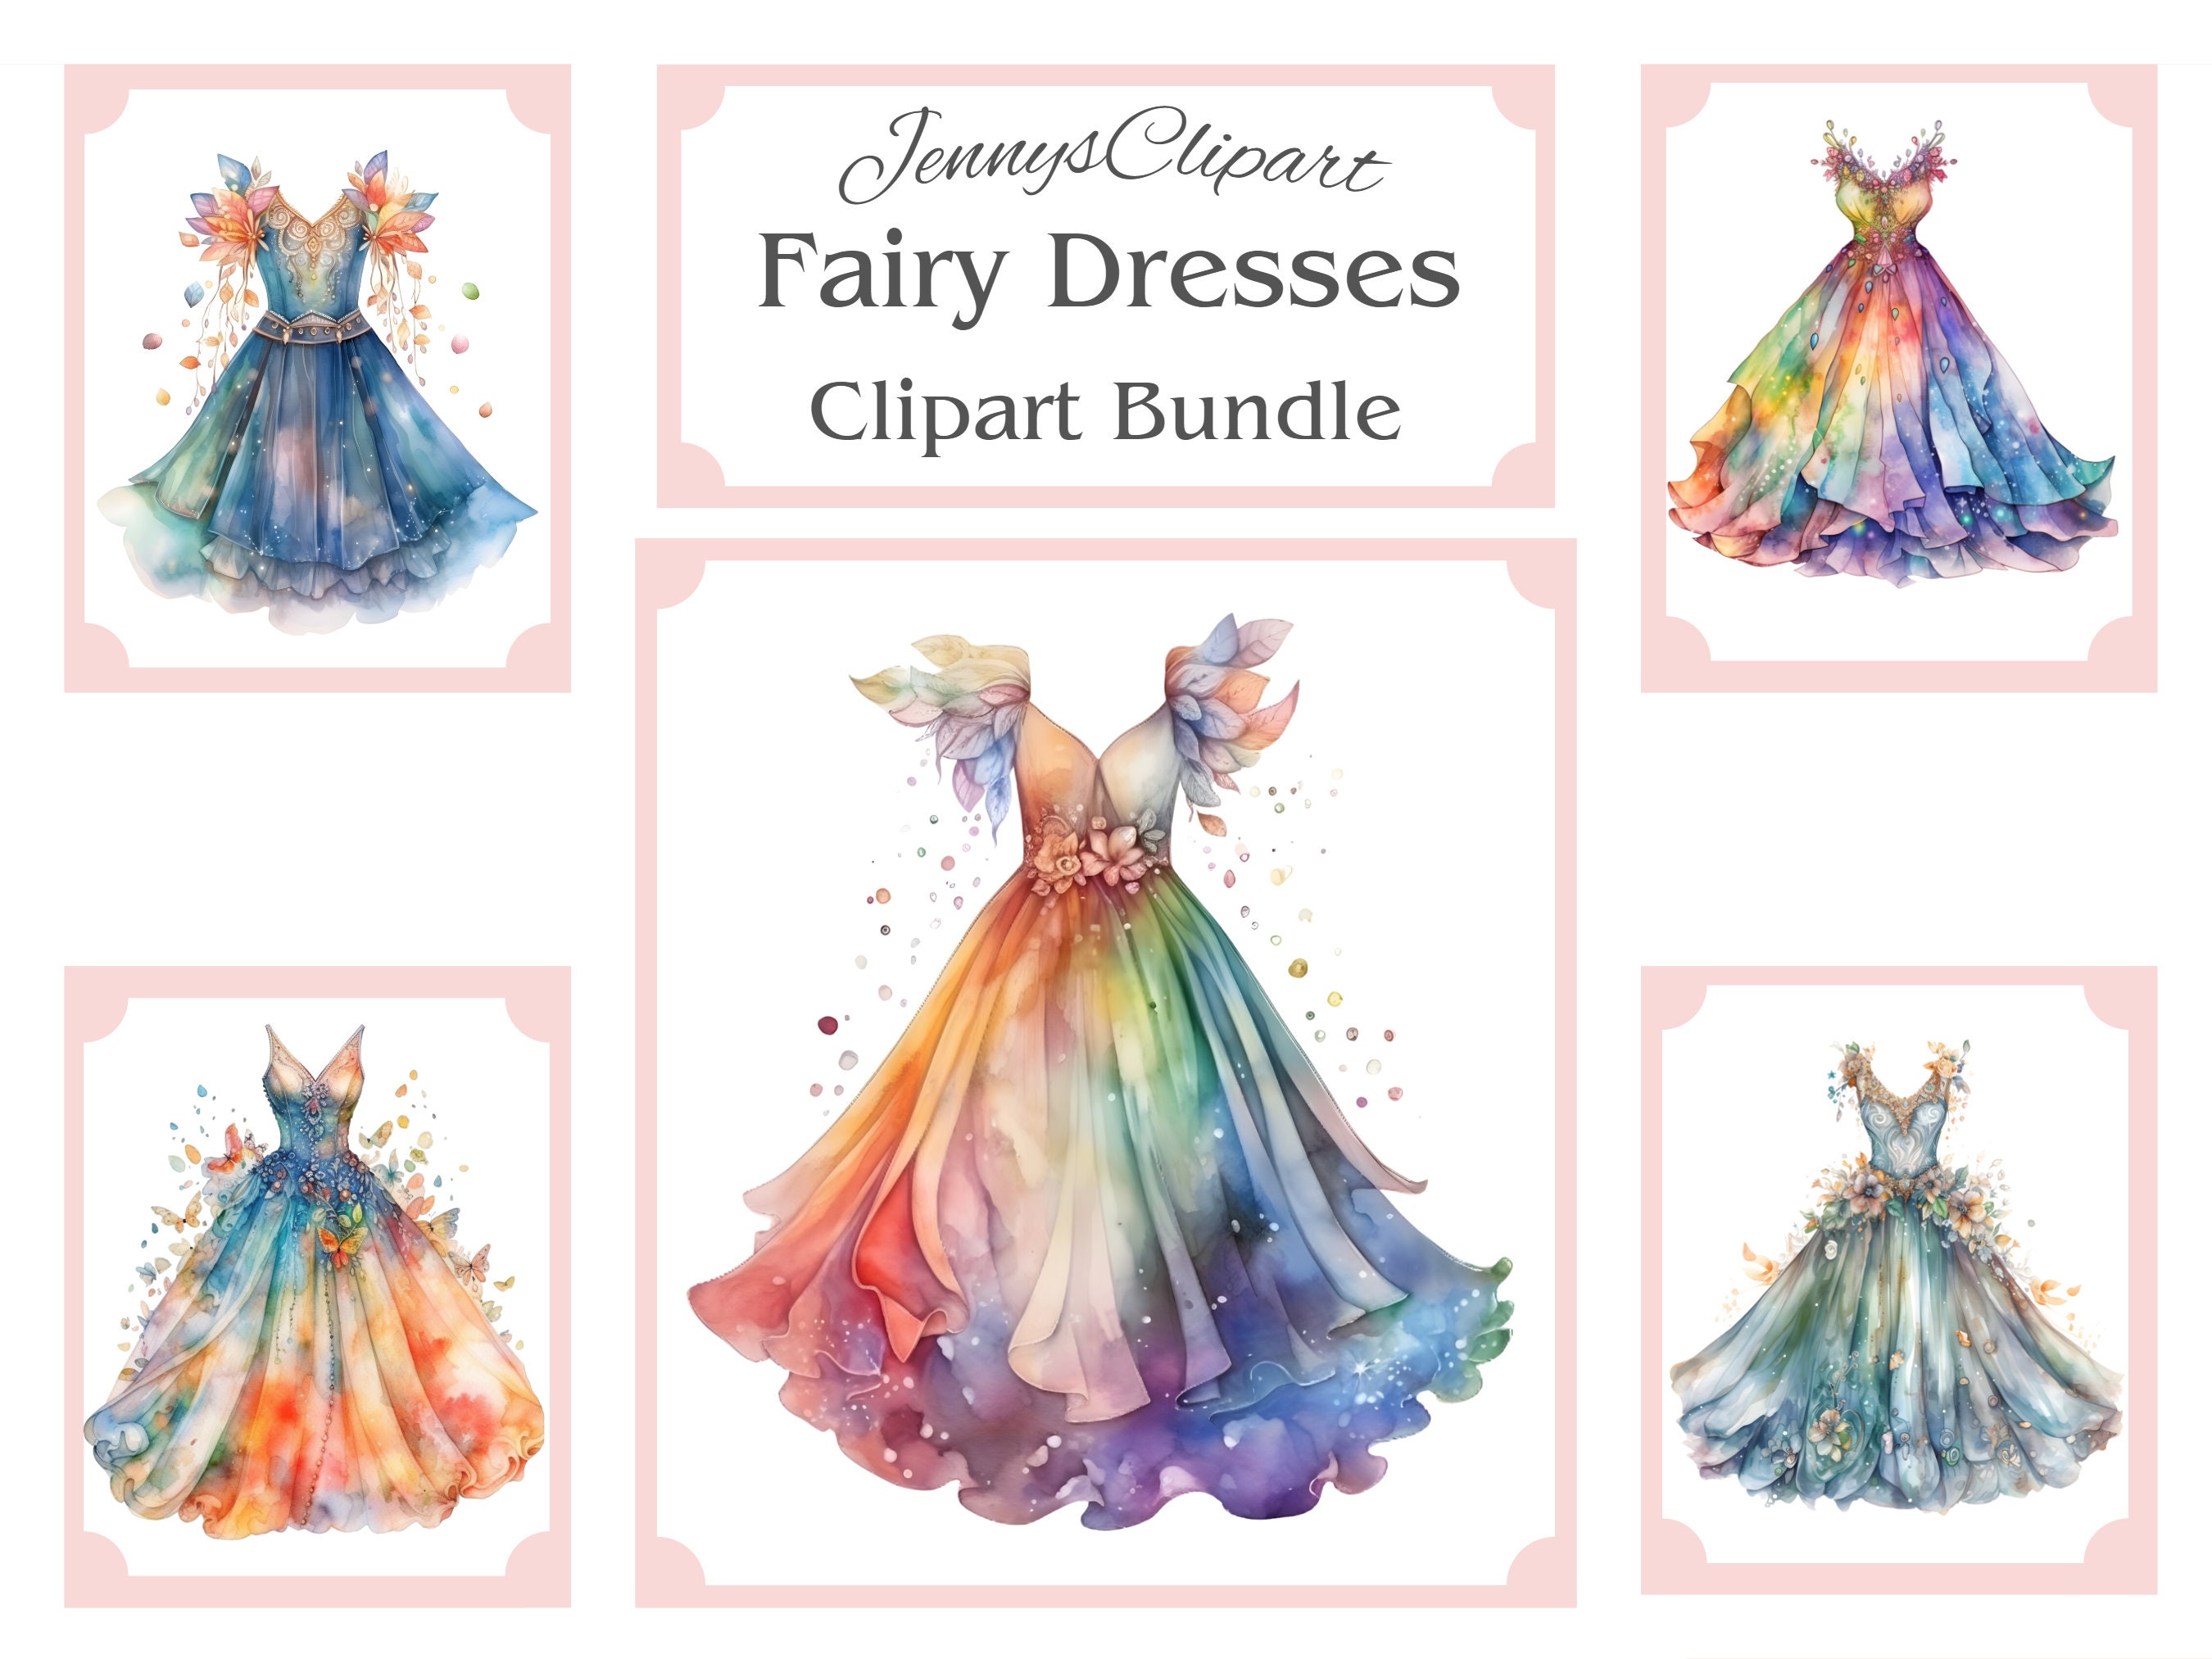 Drawn Fairy Clothing - Dress Design Drawing Fairy Transparent PNG -  709x1128 - Free Download on NicePNG